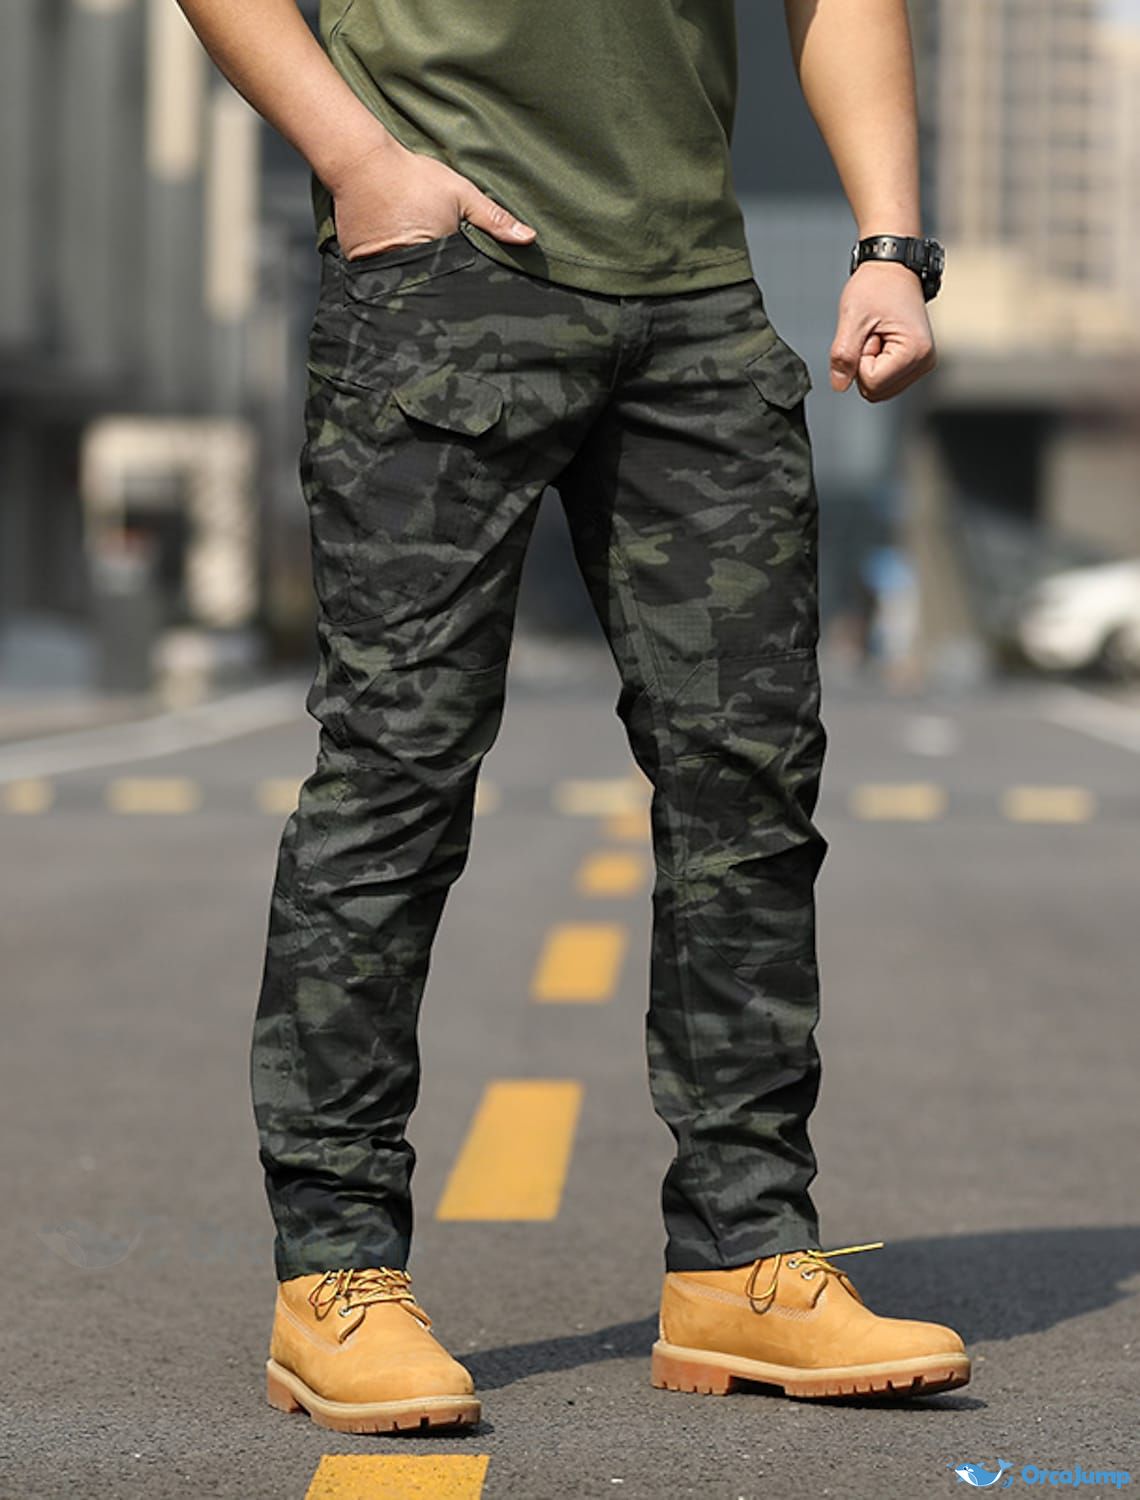 Men's Military Tactical Pants Casual Camouflage Multi-Pocket BDU Cargo Pants  Trousers - High Speed BBs